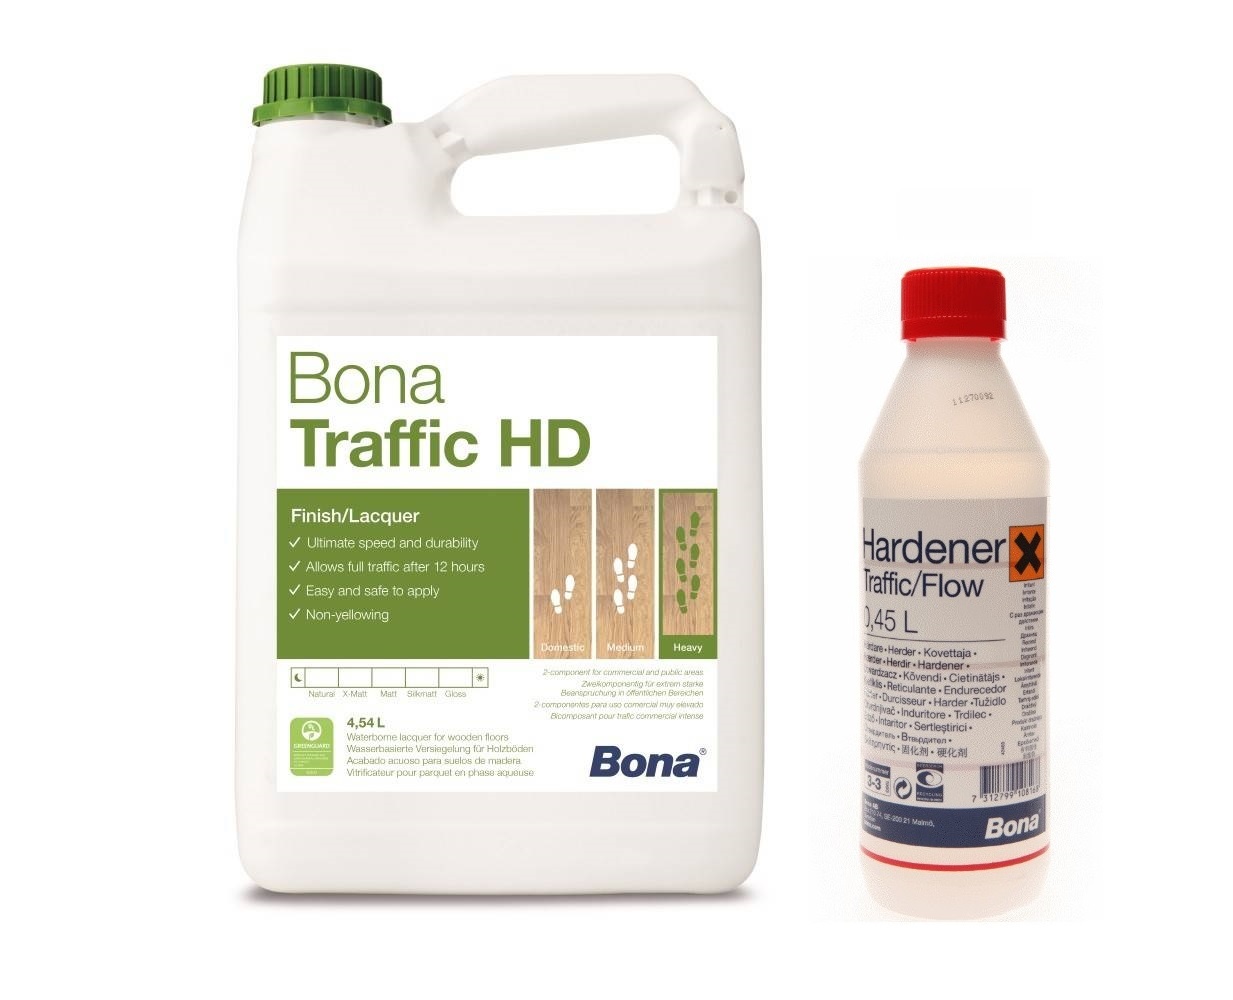 Caring For Your Wood Floors With The Bona Traffic HD